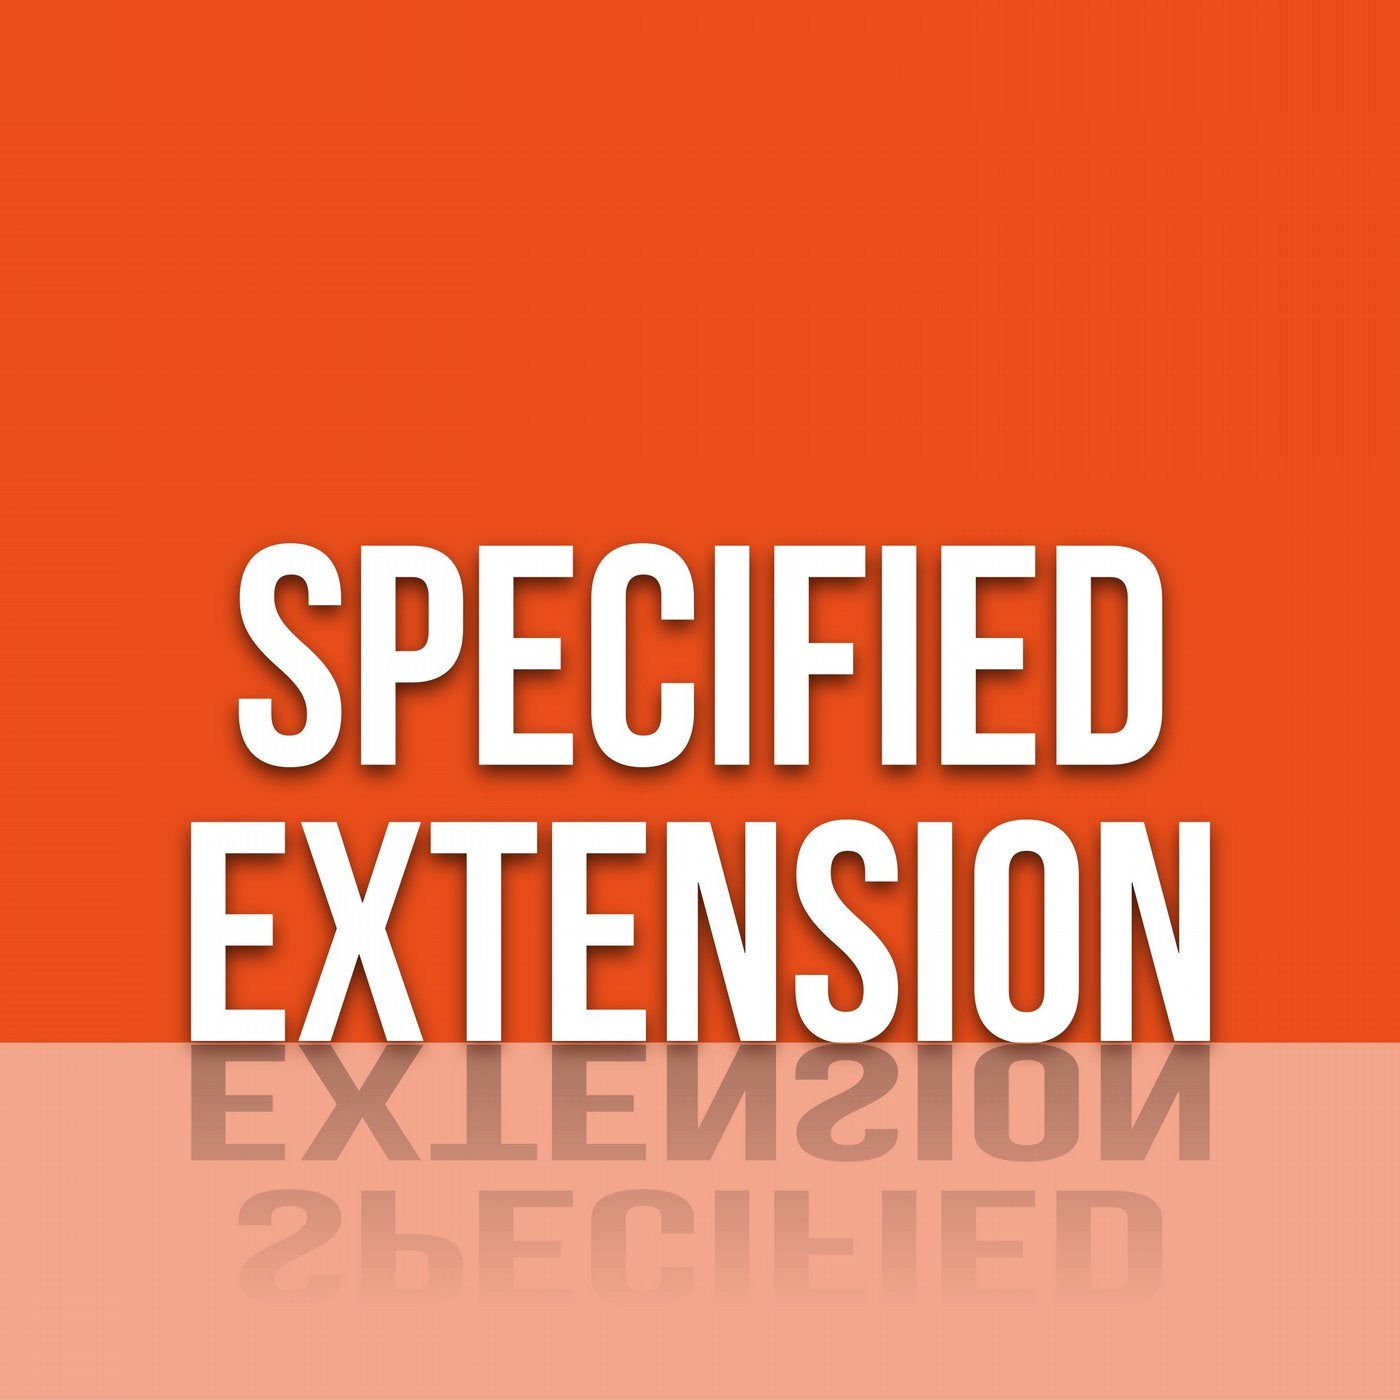 Specified Extension